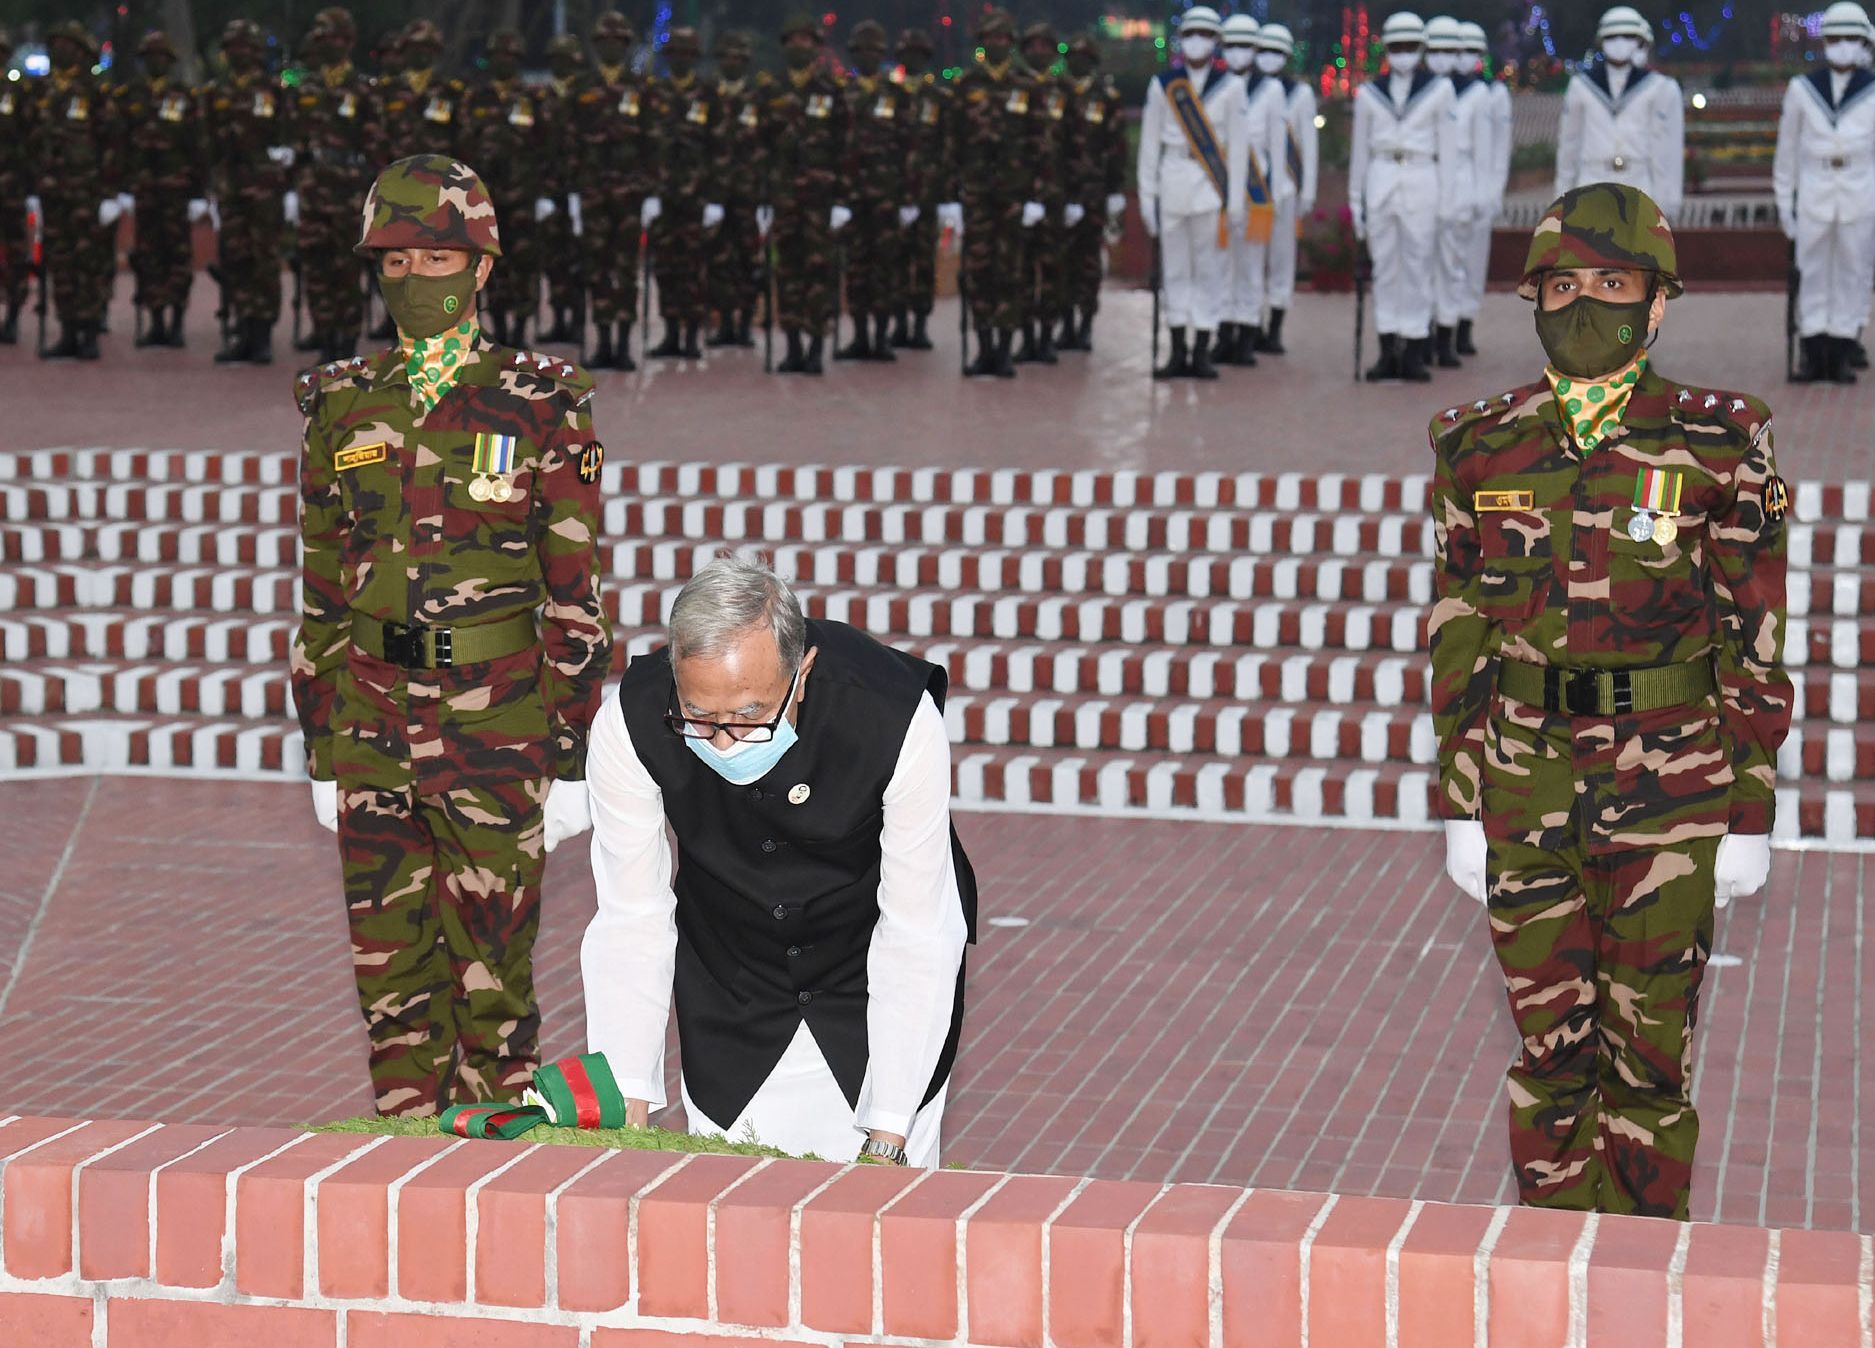 The president first placed the wreath at the altar of the memorial followed by the prime minister.